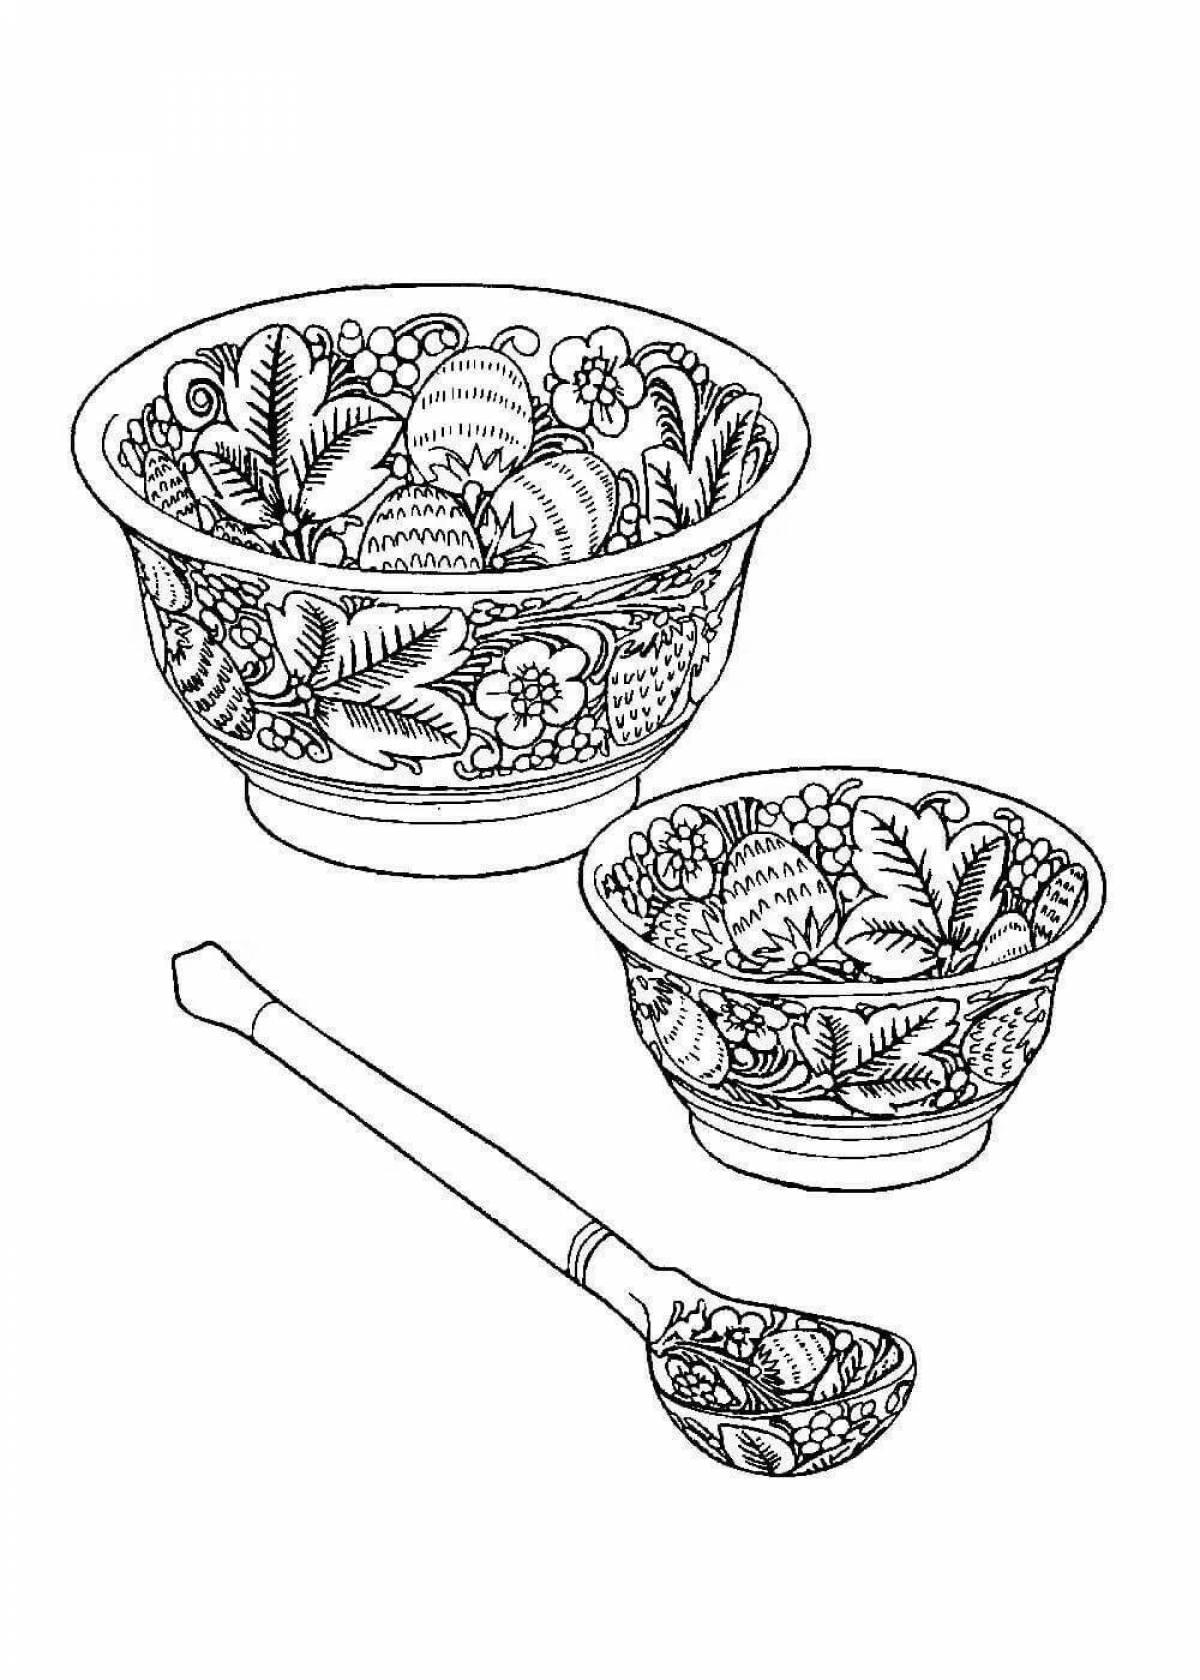 Exquisite painted wooden spoon coloring page